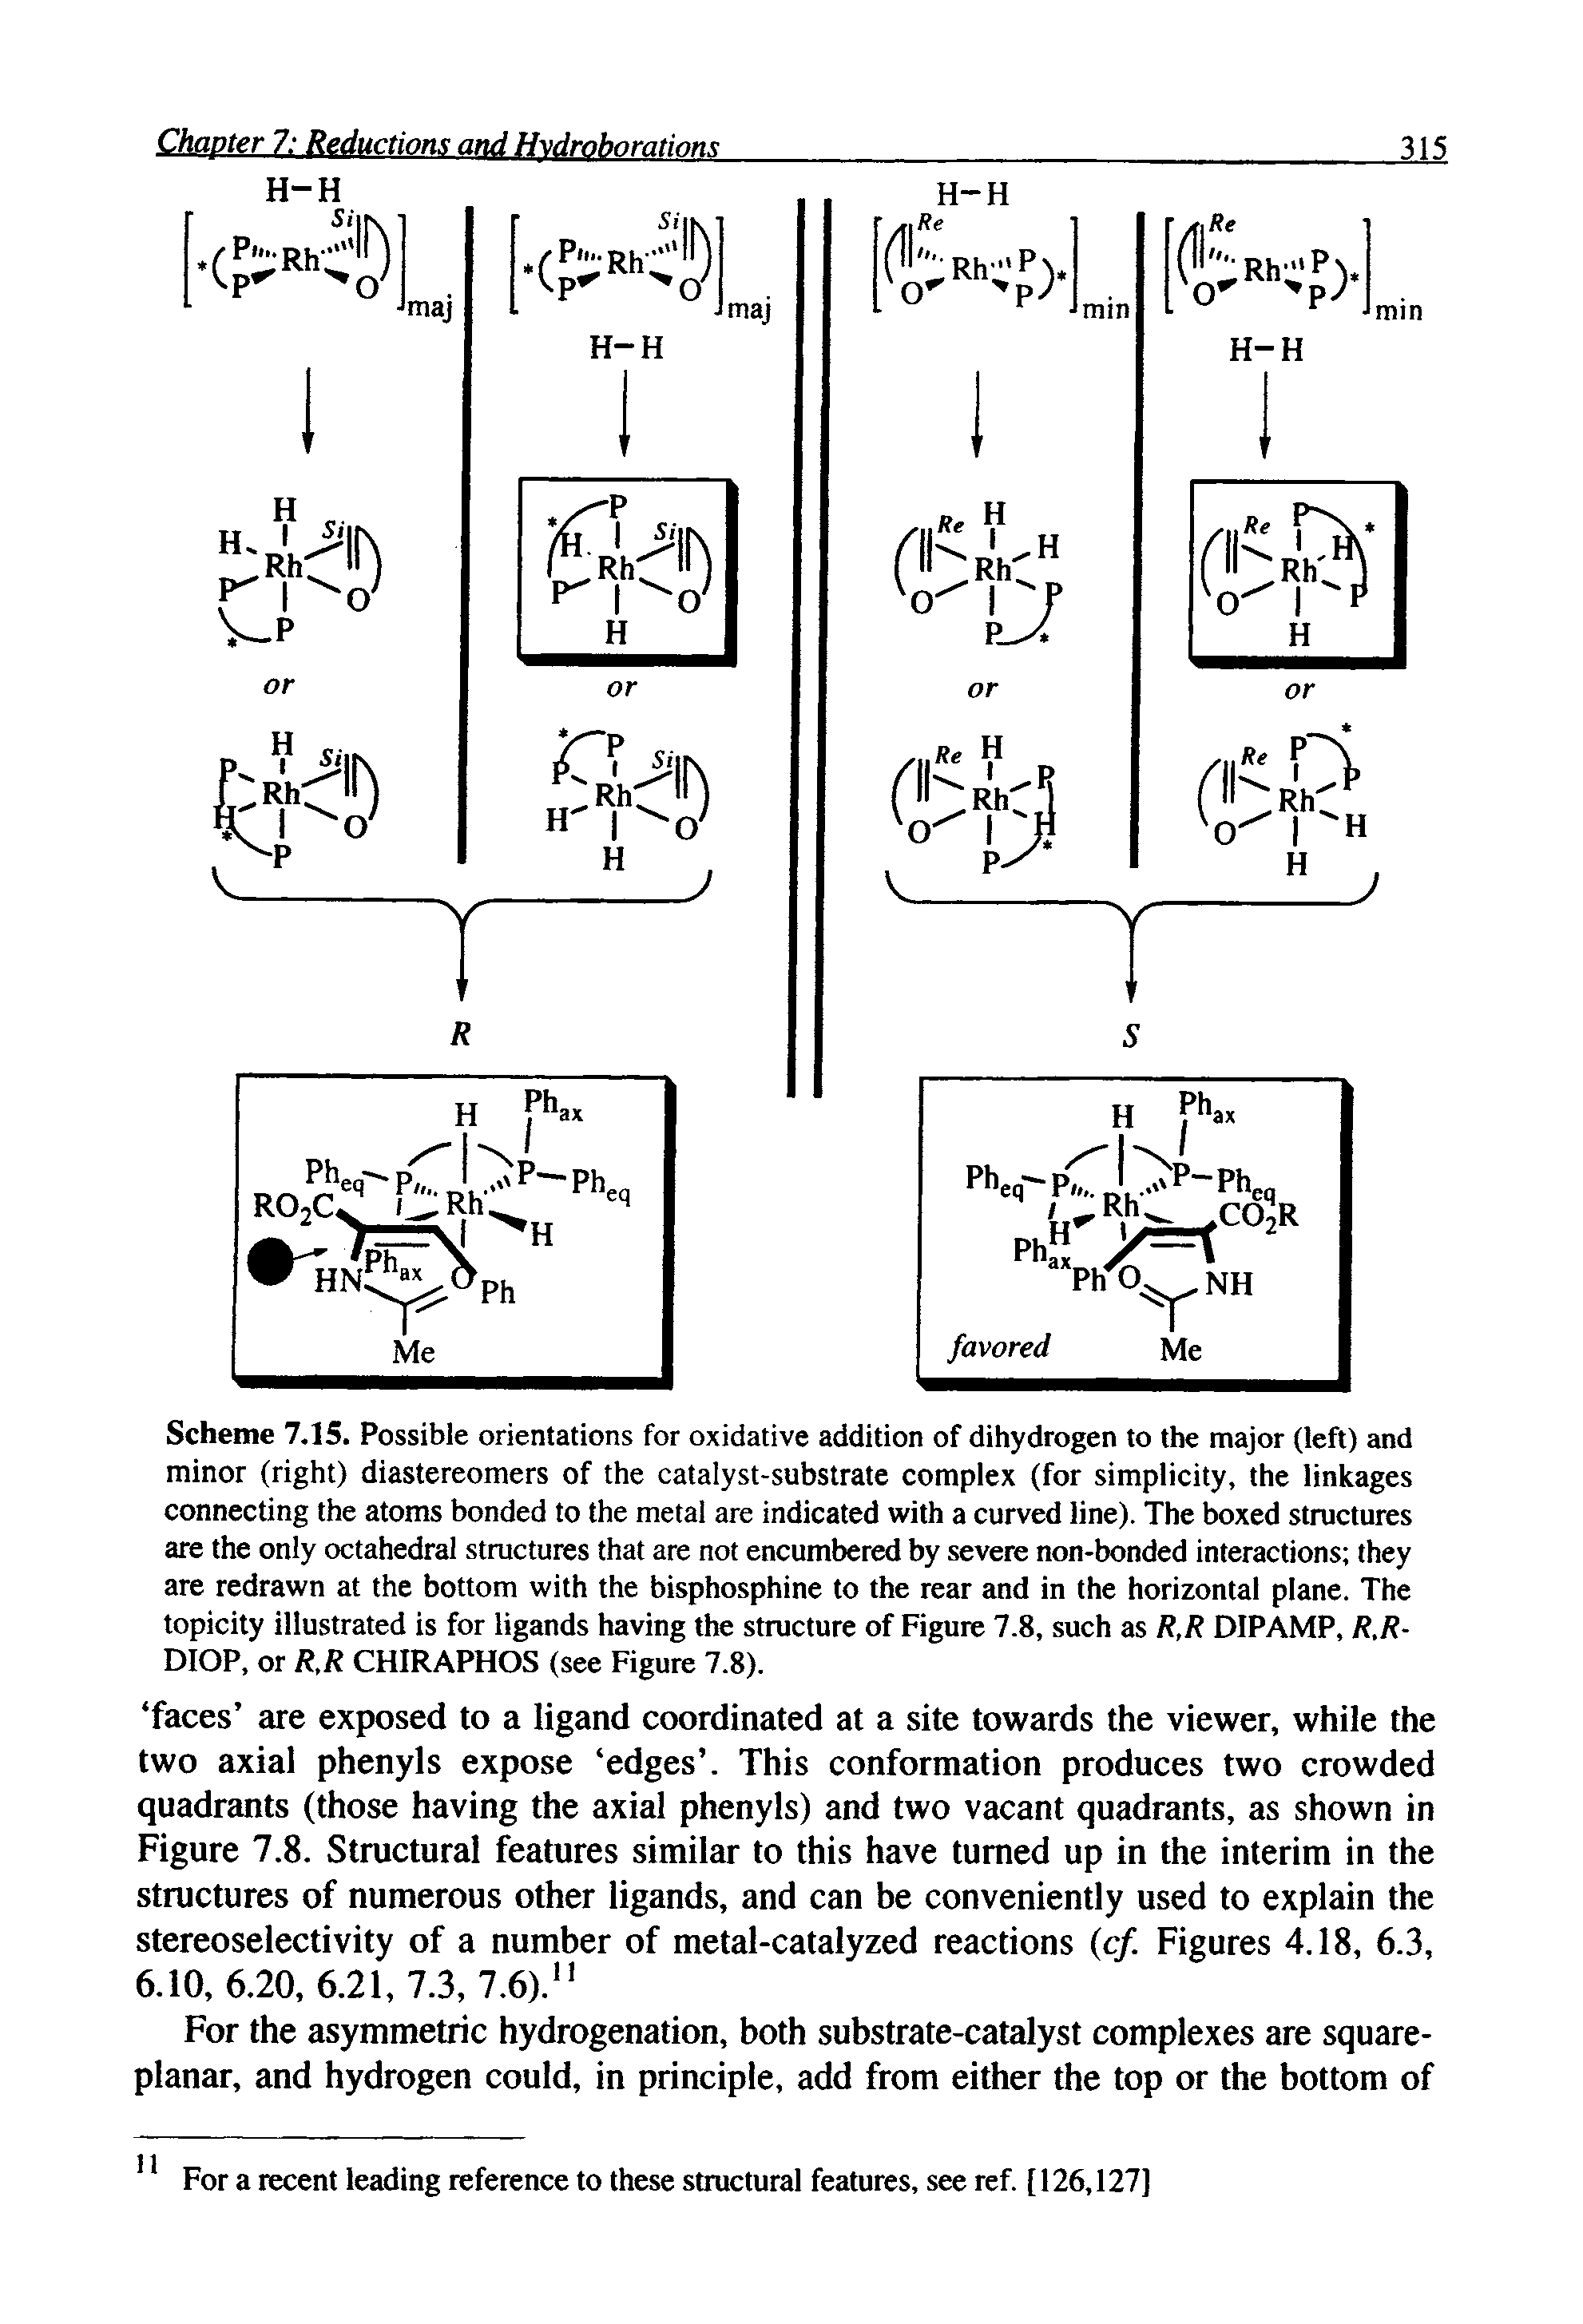 Scheme 7.15. Possible orientations for oxidative addition of dihydrogen to the major (left) and minor (right) diastereomers of the catalyst-substrate complex (for simplicity, the linkages connecting the atoms bonded to the metal are indicated with a curved line). The boxed structures are the only octahedral structures that are not encumbered by severe non-bonded interactions they are redrawn at the bottom with the bisphosphine to the rear and in the horizontal plane. The topicity illustrated is for ligands having the structure of Figure 7.8, such as R,R DIP AMP, R.R-DIOP, or R,R CHIRAPHOS (see Figure 7.8).